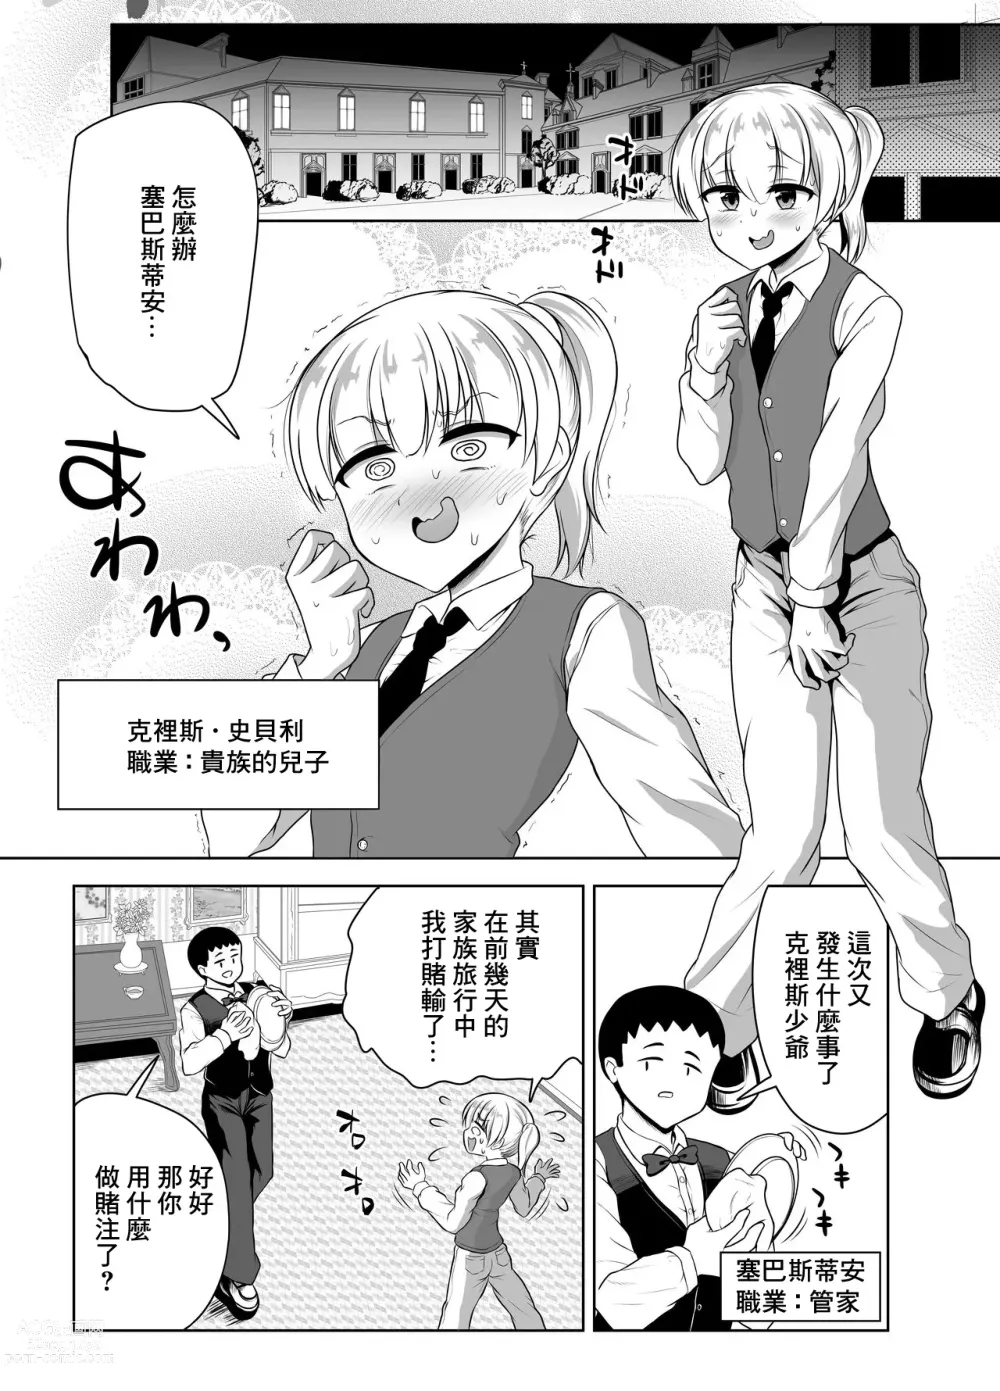 Page 3 of doujinshi Noble Asshole